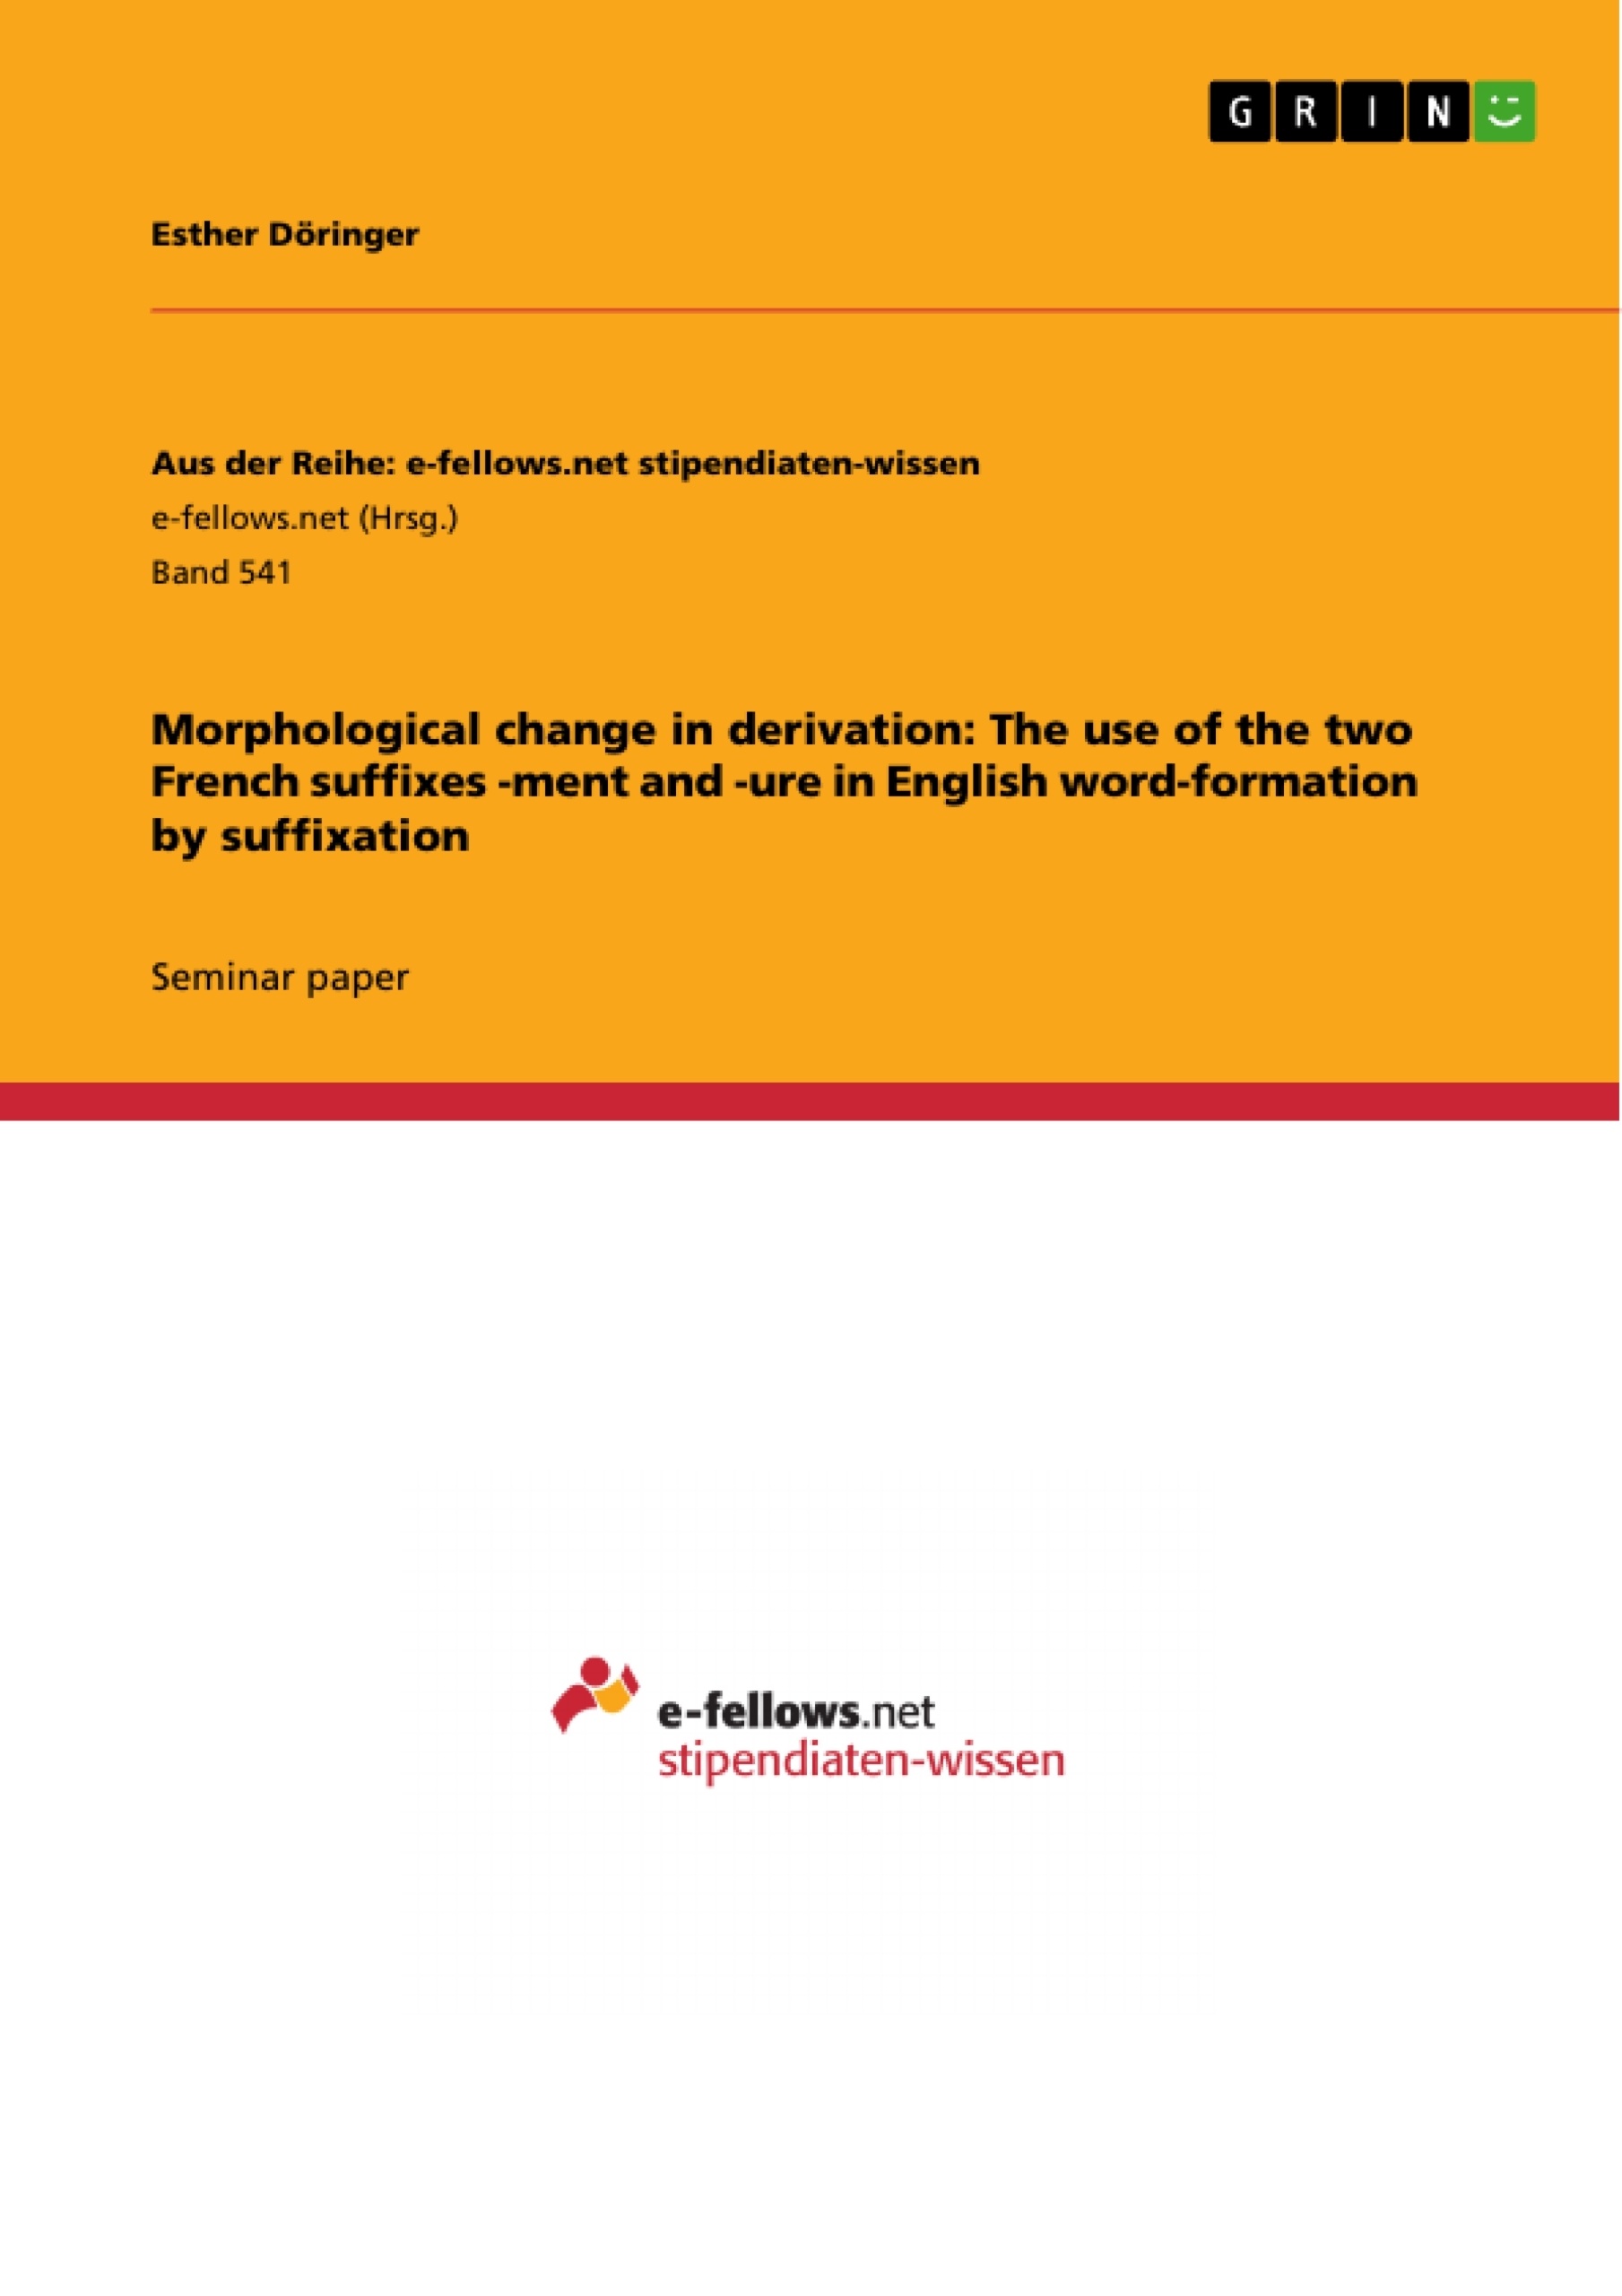 Title: Morphological change in derivation: The use of the two French suffixes -ment and -ure in English word-formation by suffixation